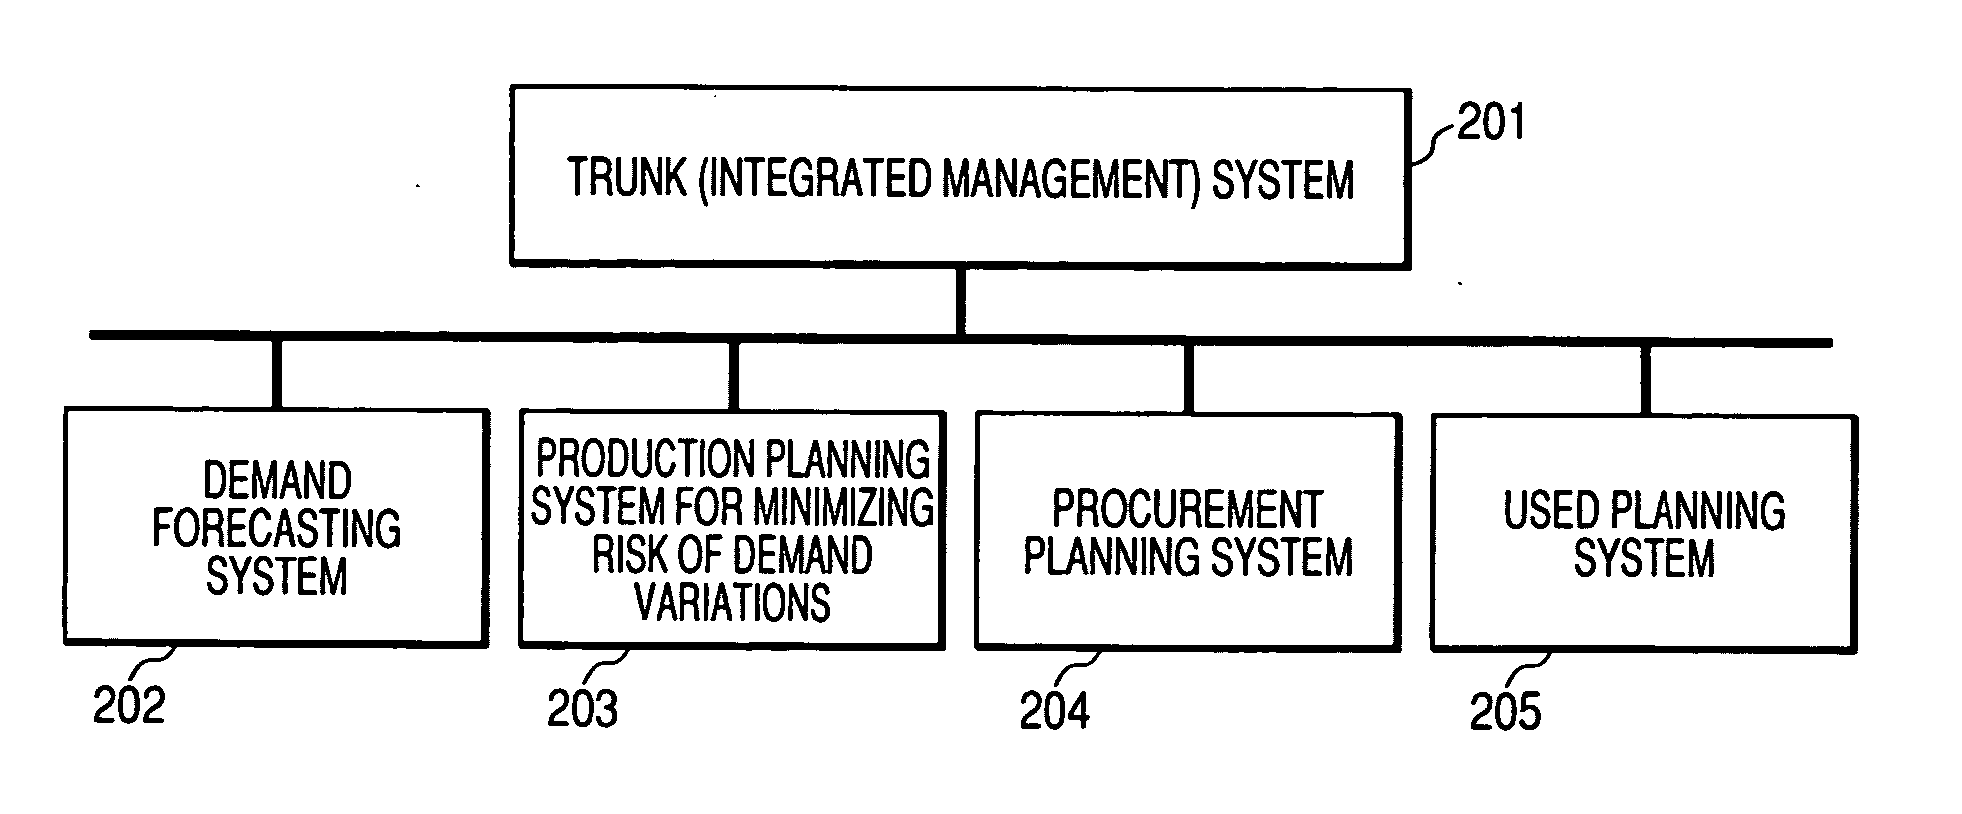 Method of creating production plan of demand variation input type and method of creating production plan minimizing risk of demand variations